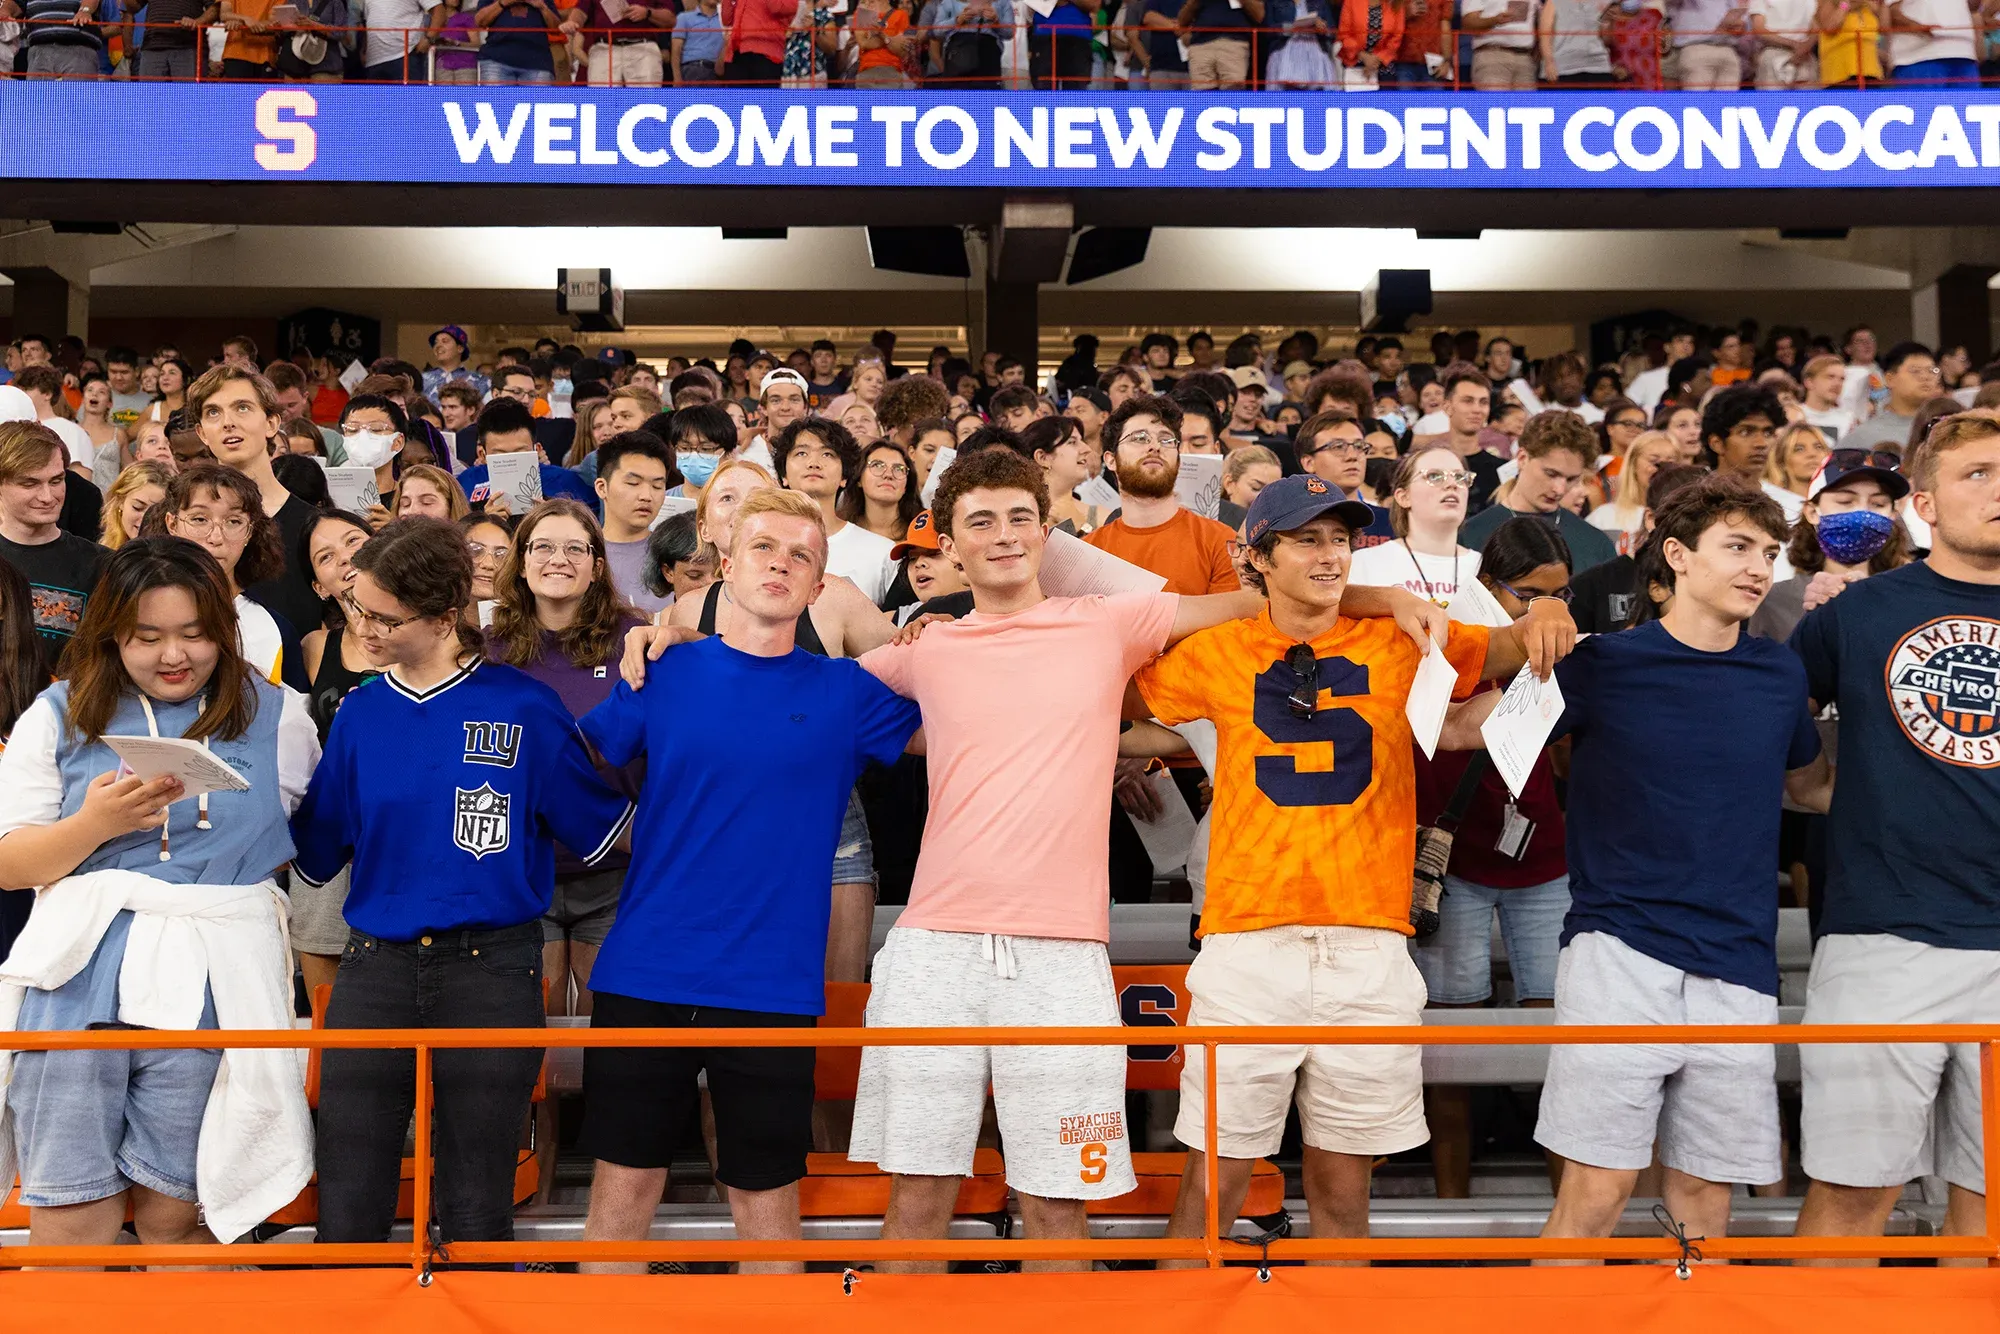 Students standing in a crowd singing the Syracuse University alma mater.